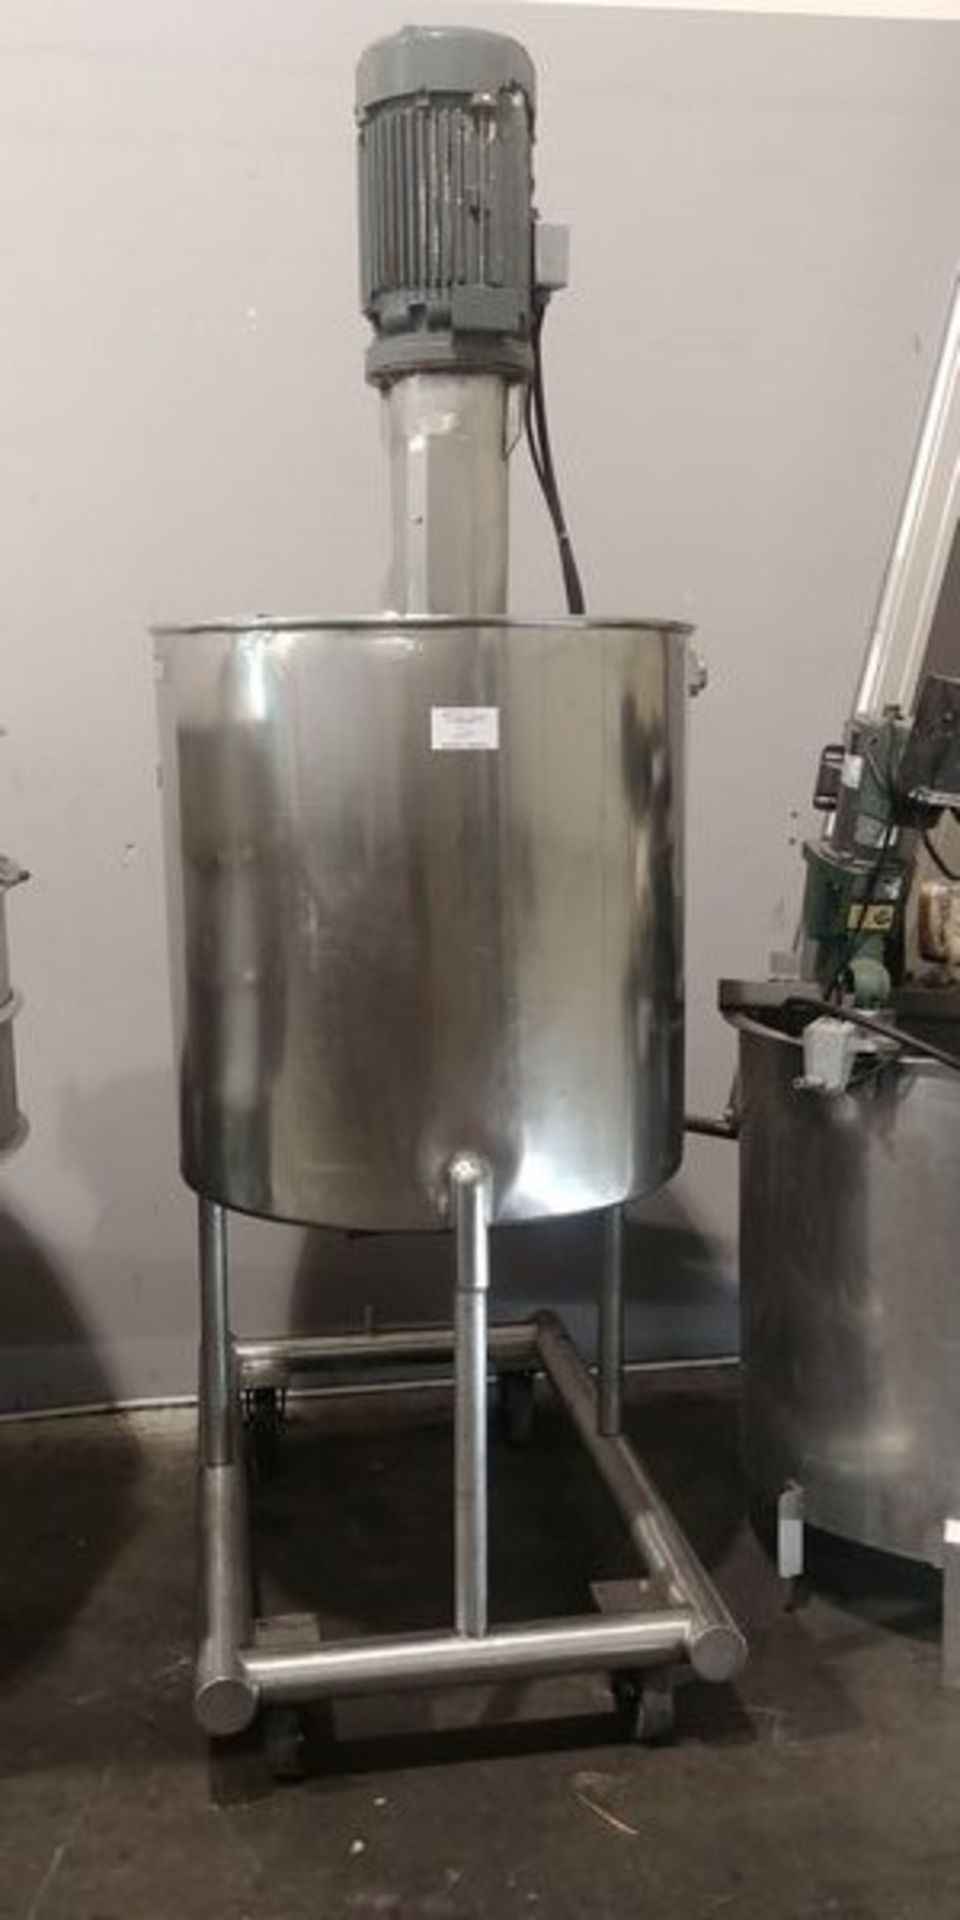 Stainless Steel Tank on Casters with High Speed Blender- Tanks Size Approx. 34" x 34"